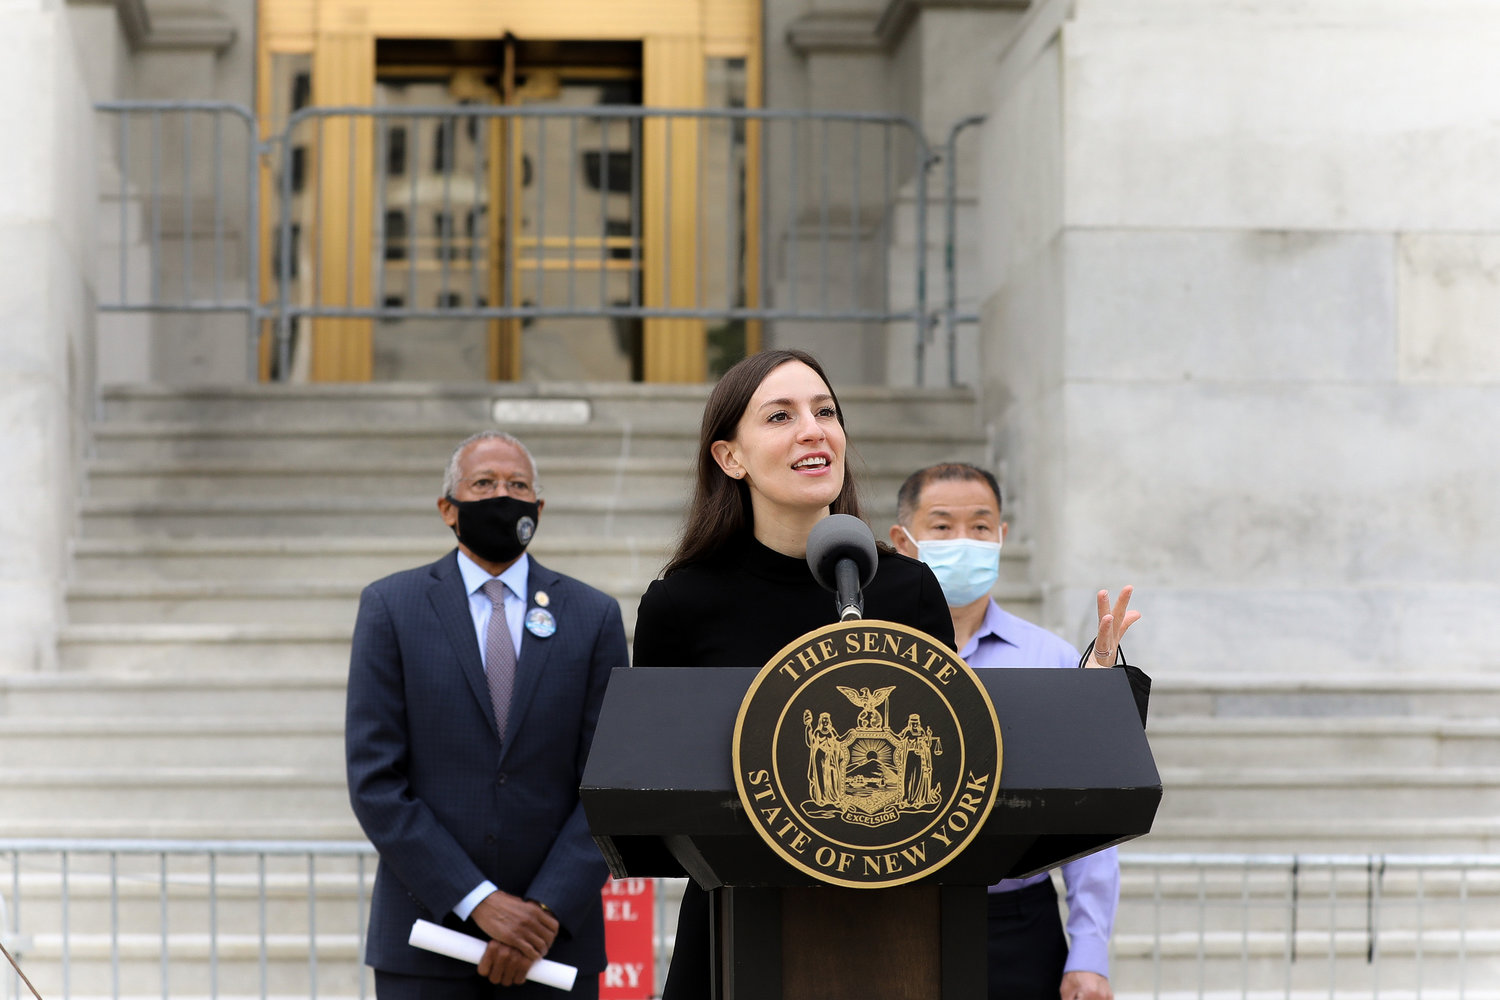 Last month’s Democratic primaries were messy because of incompetence on the city elections board, according to state Sen. Alessandra Biaggi, and had nothing to do with ranked-choice voting. That’s why Biaggi is working on a state constitutional amendment that would change how elections board commissioners and members are chosen.